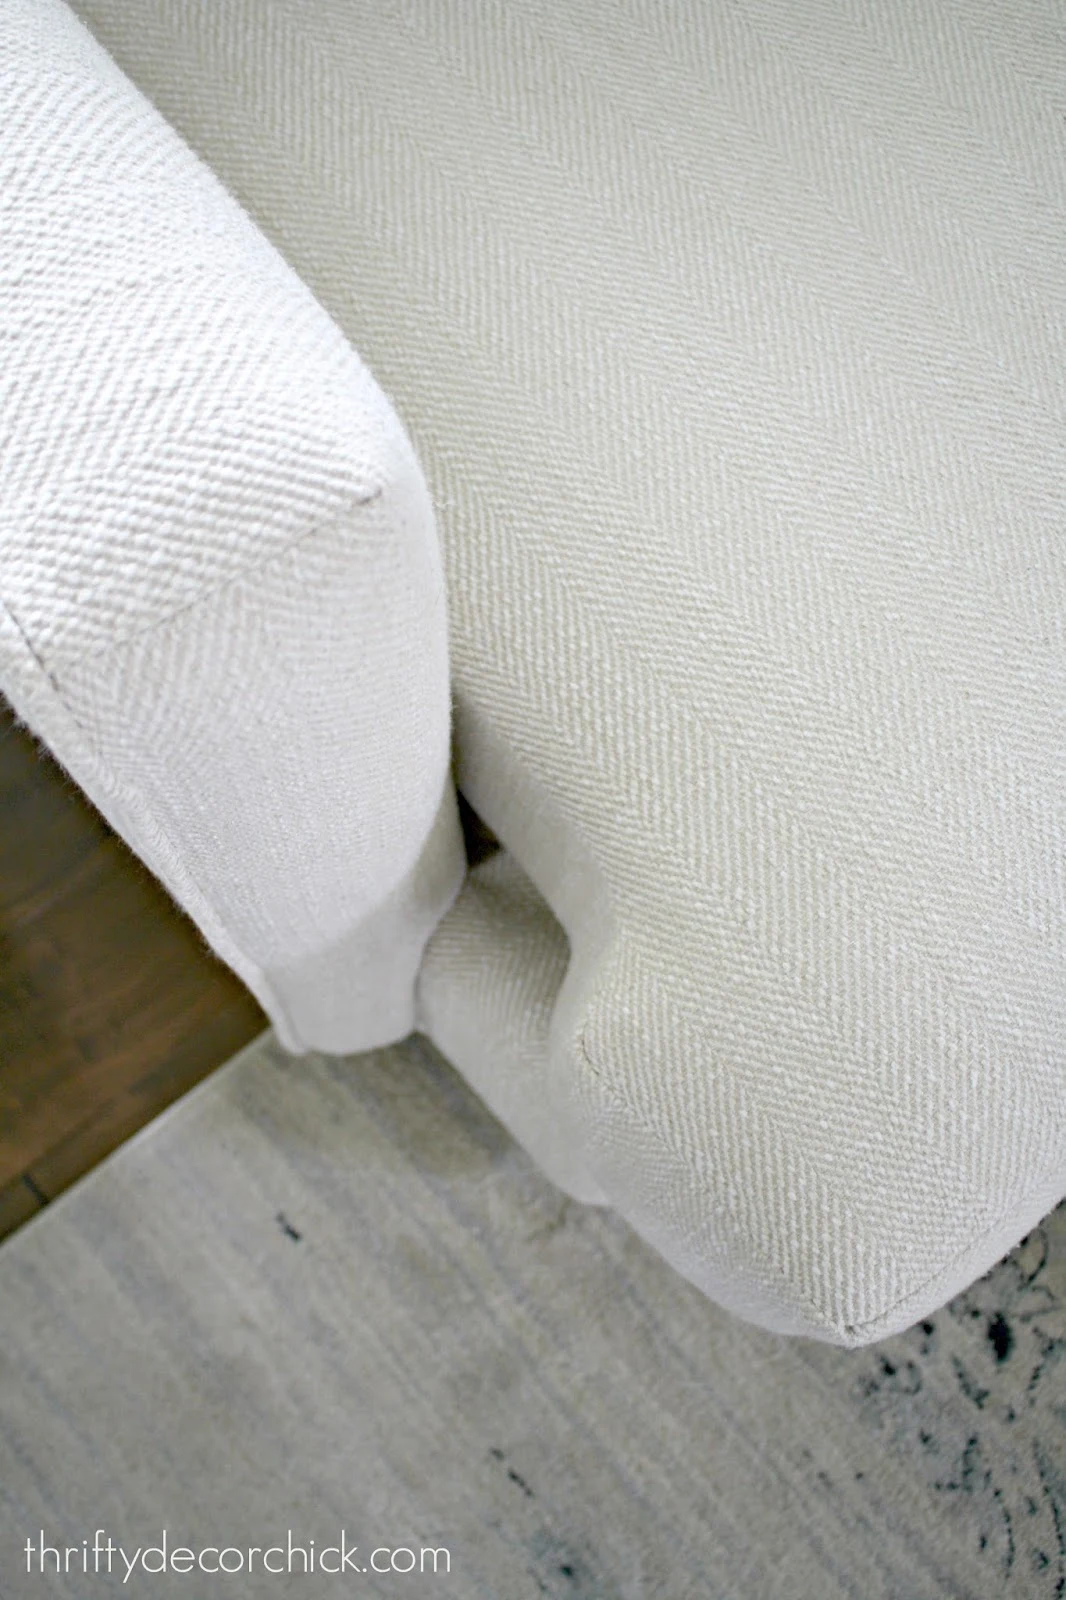 How to Stop Couch Cushions from Sliding - 9 Easy Methods